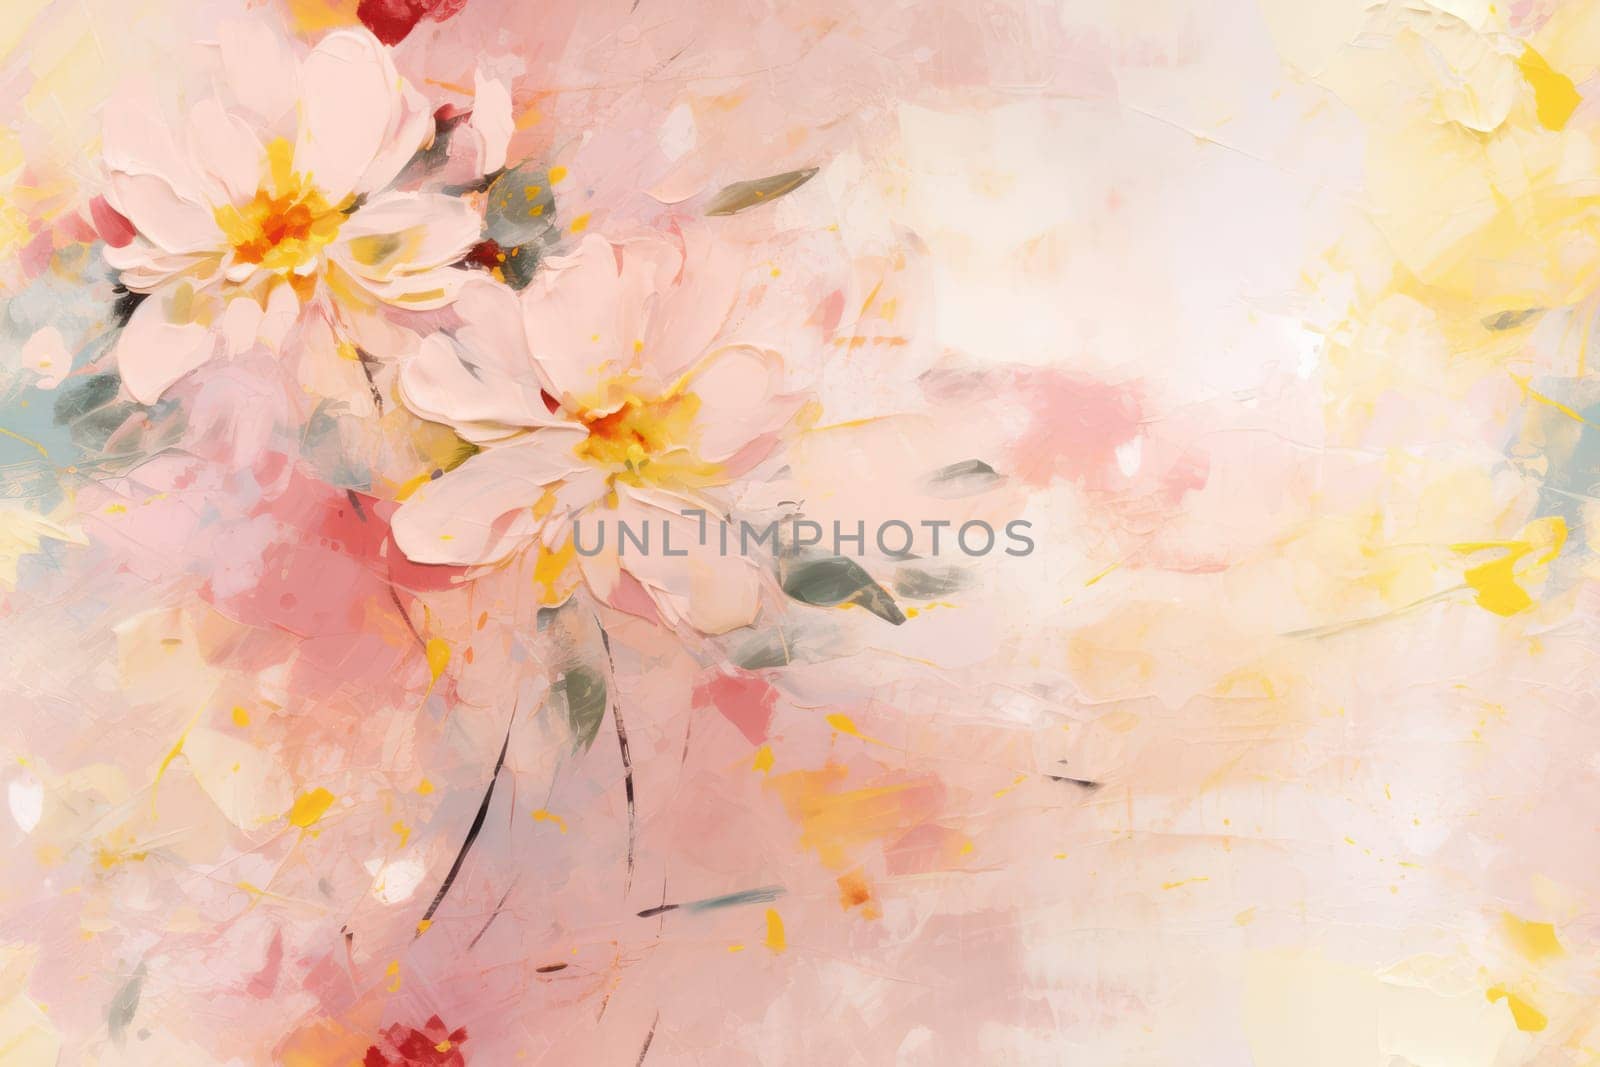 Colorful Floral Blossom: A Vibrant Watercolor Illustration of a Bright Pink Rose Bouquet on a White Background